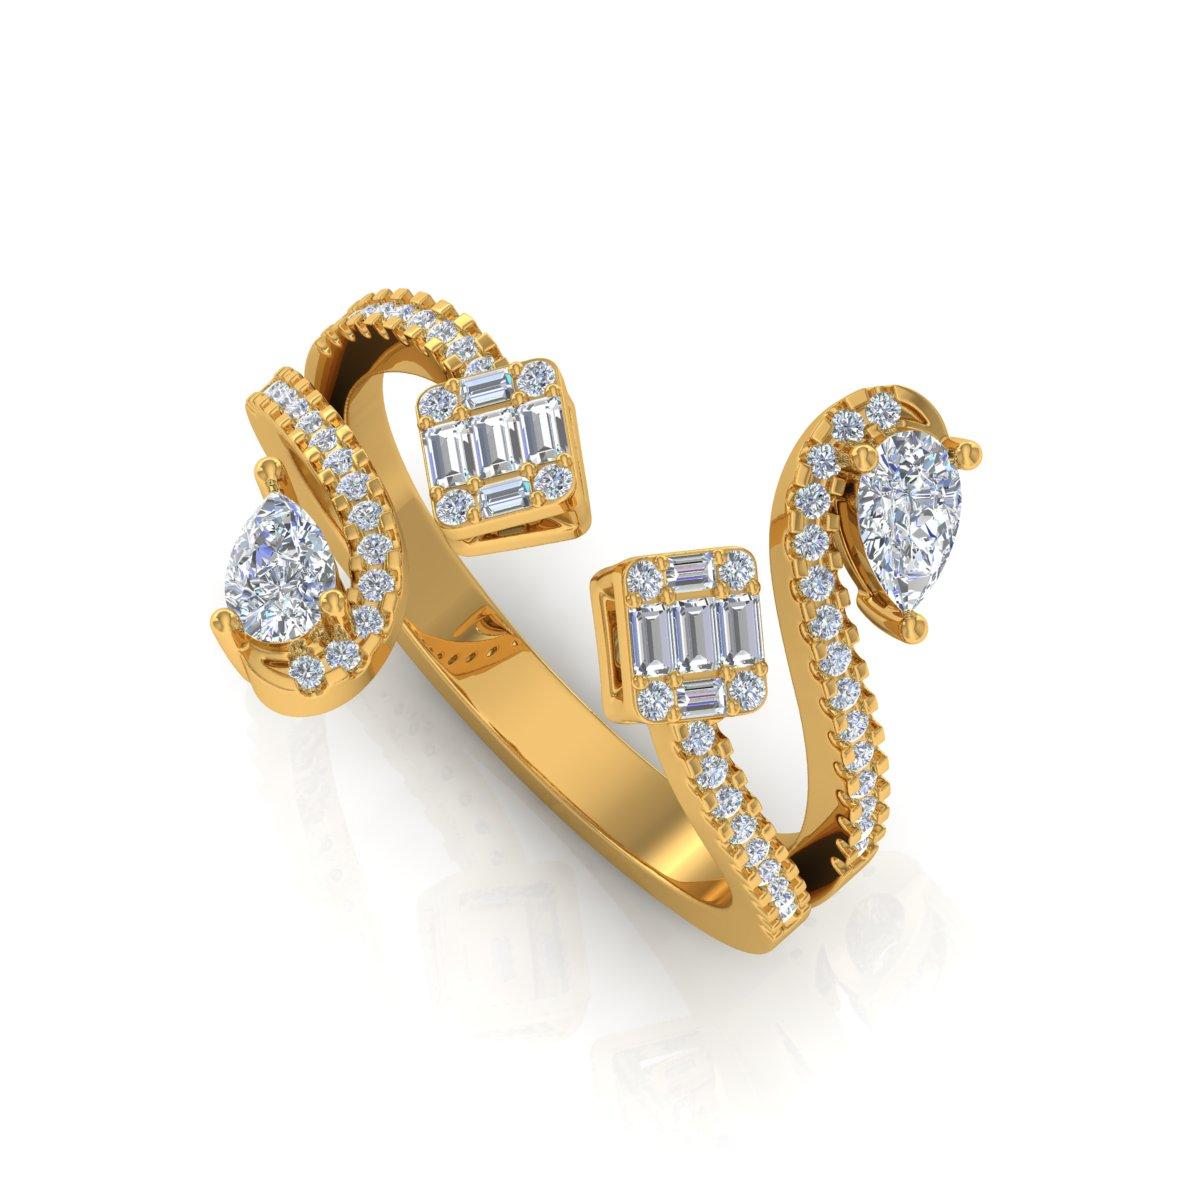 Item Code :- CN-40256
Gross Wt. :- 3.90 gm
18k Yellow Gold Wt. :- 3.71 gm
Natural Diamond Wt. :- 0.95 Ct. ( AVERAGE DIAMOND CLARITY SI1-SI2 & COLOR H-I )
Ring Size :- 7 US & All size available

✦ Sizing
.....................
We can adjust most items